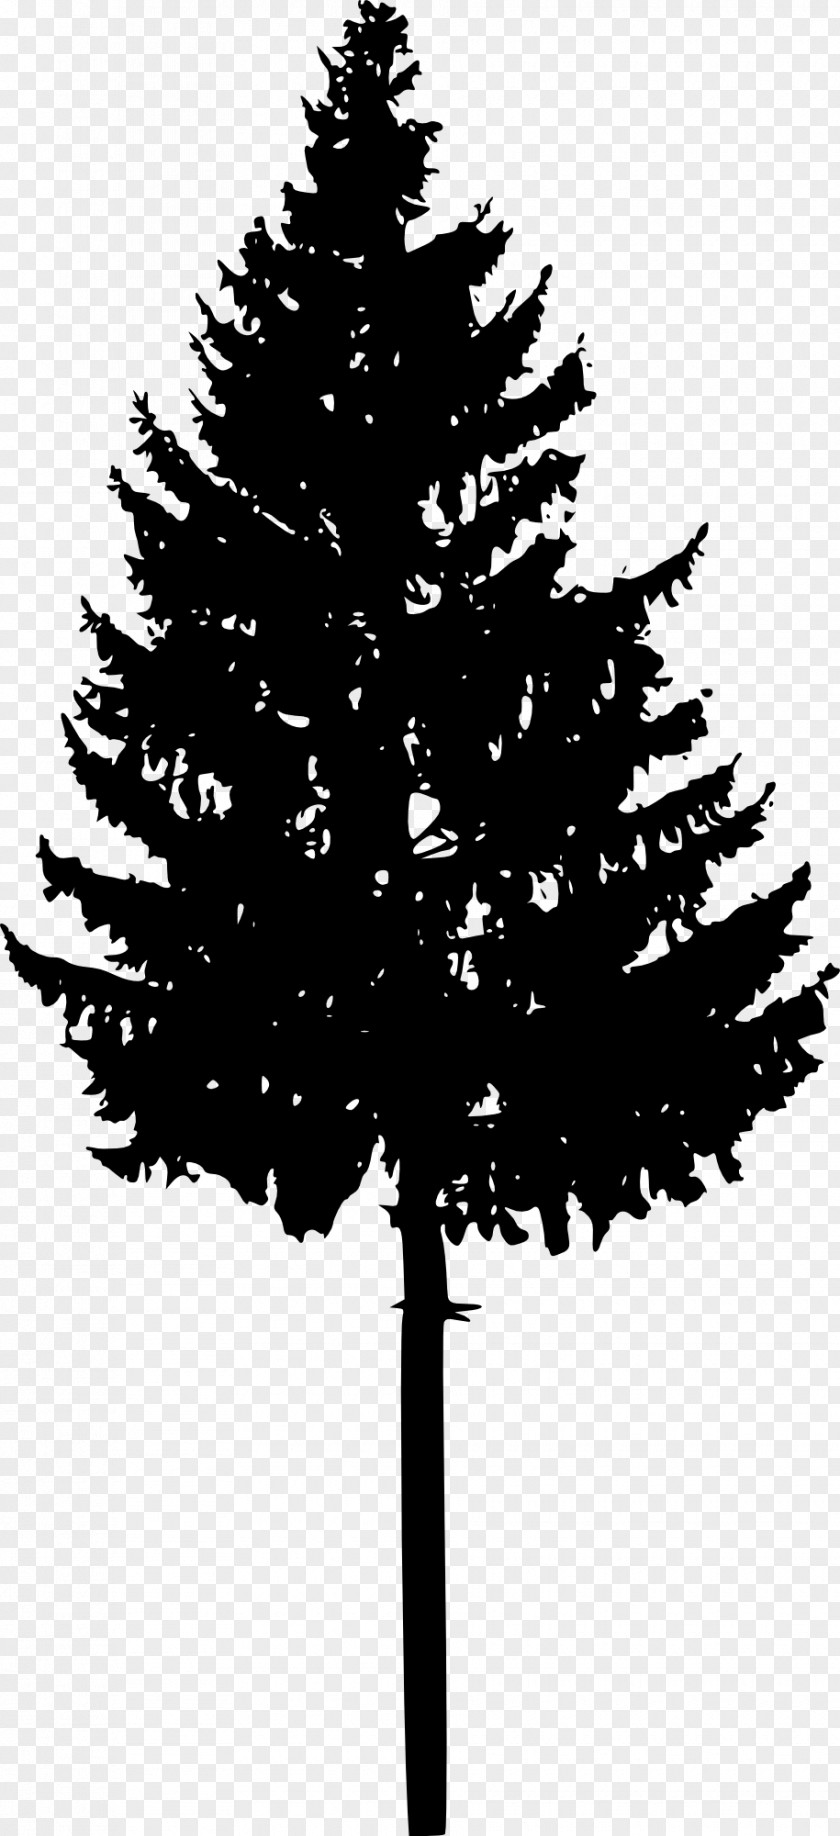 Silhouettes Tree Spruce Fir Conifers Silhouette PNG